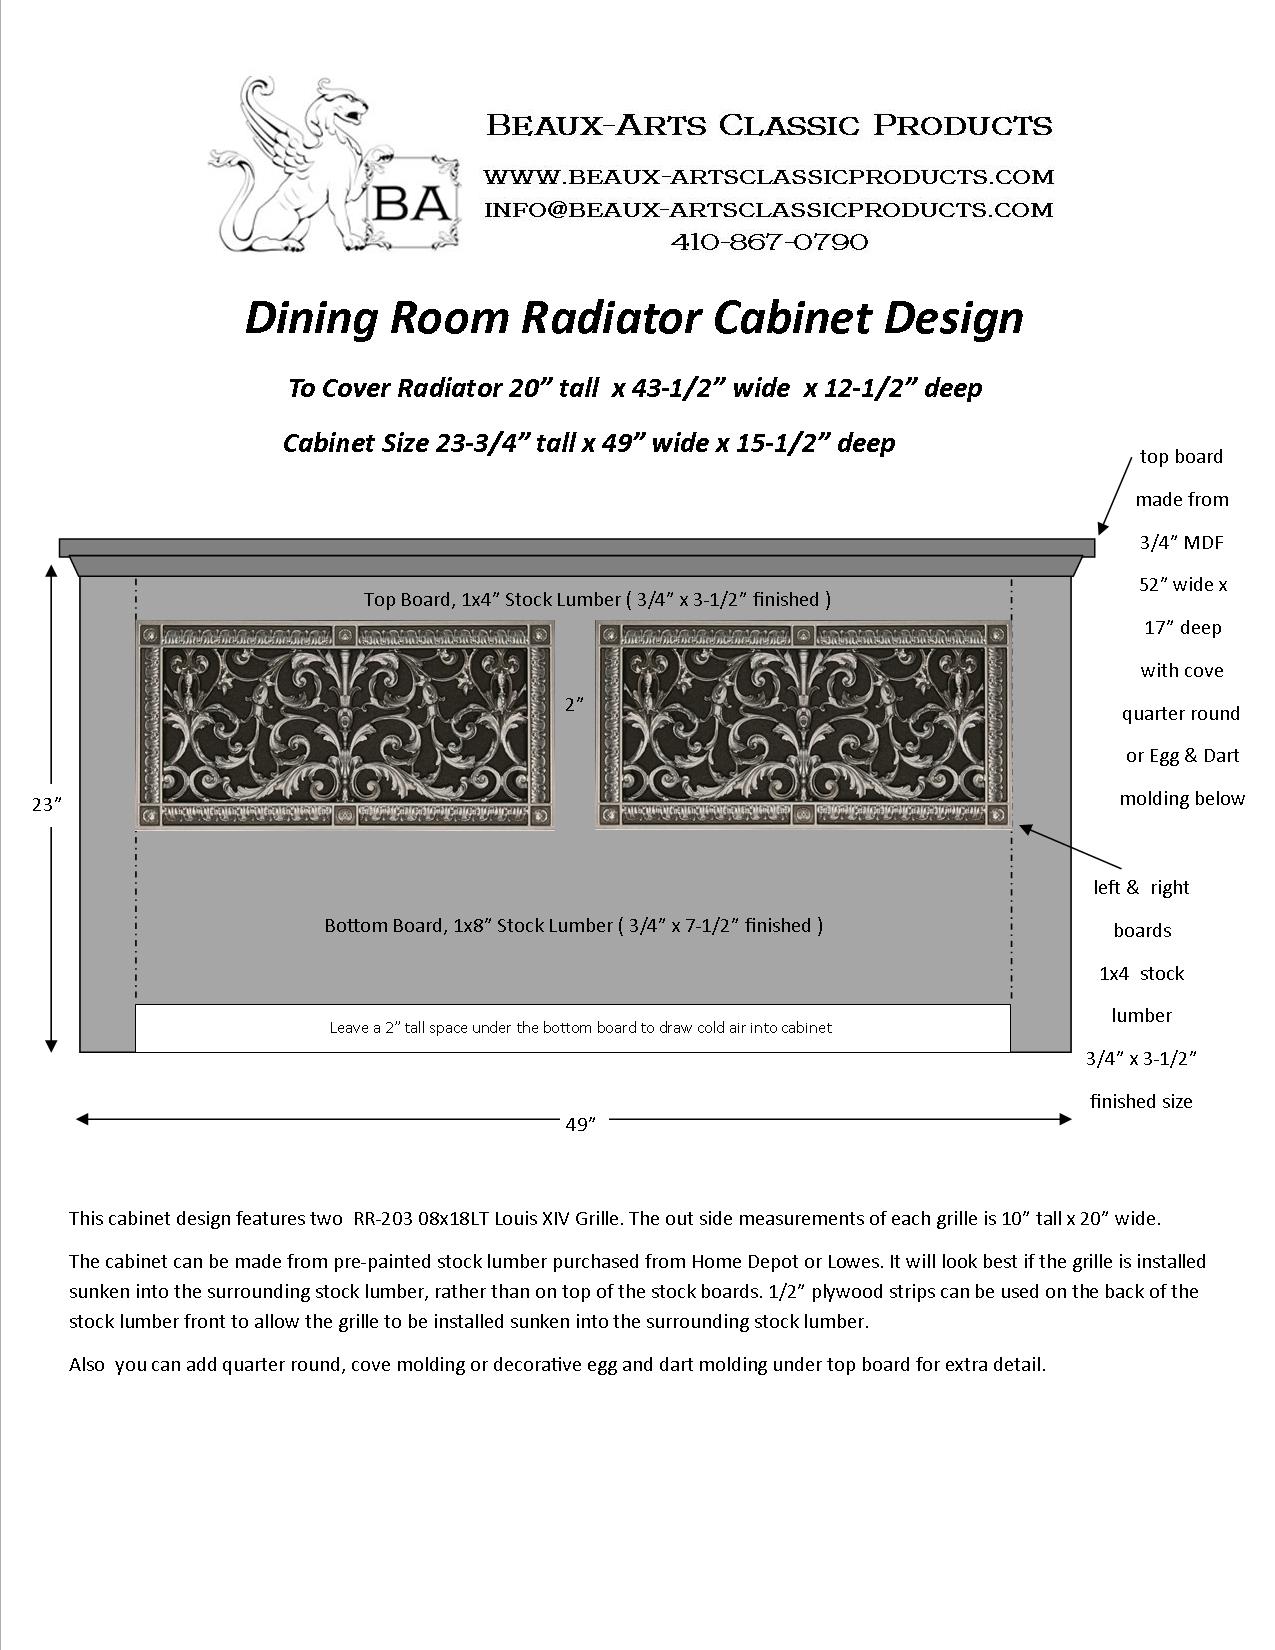 Example of a radiator cover design